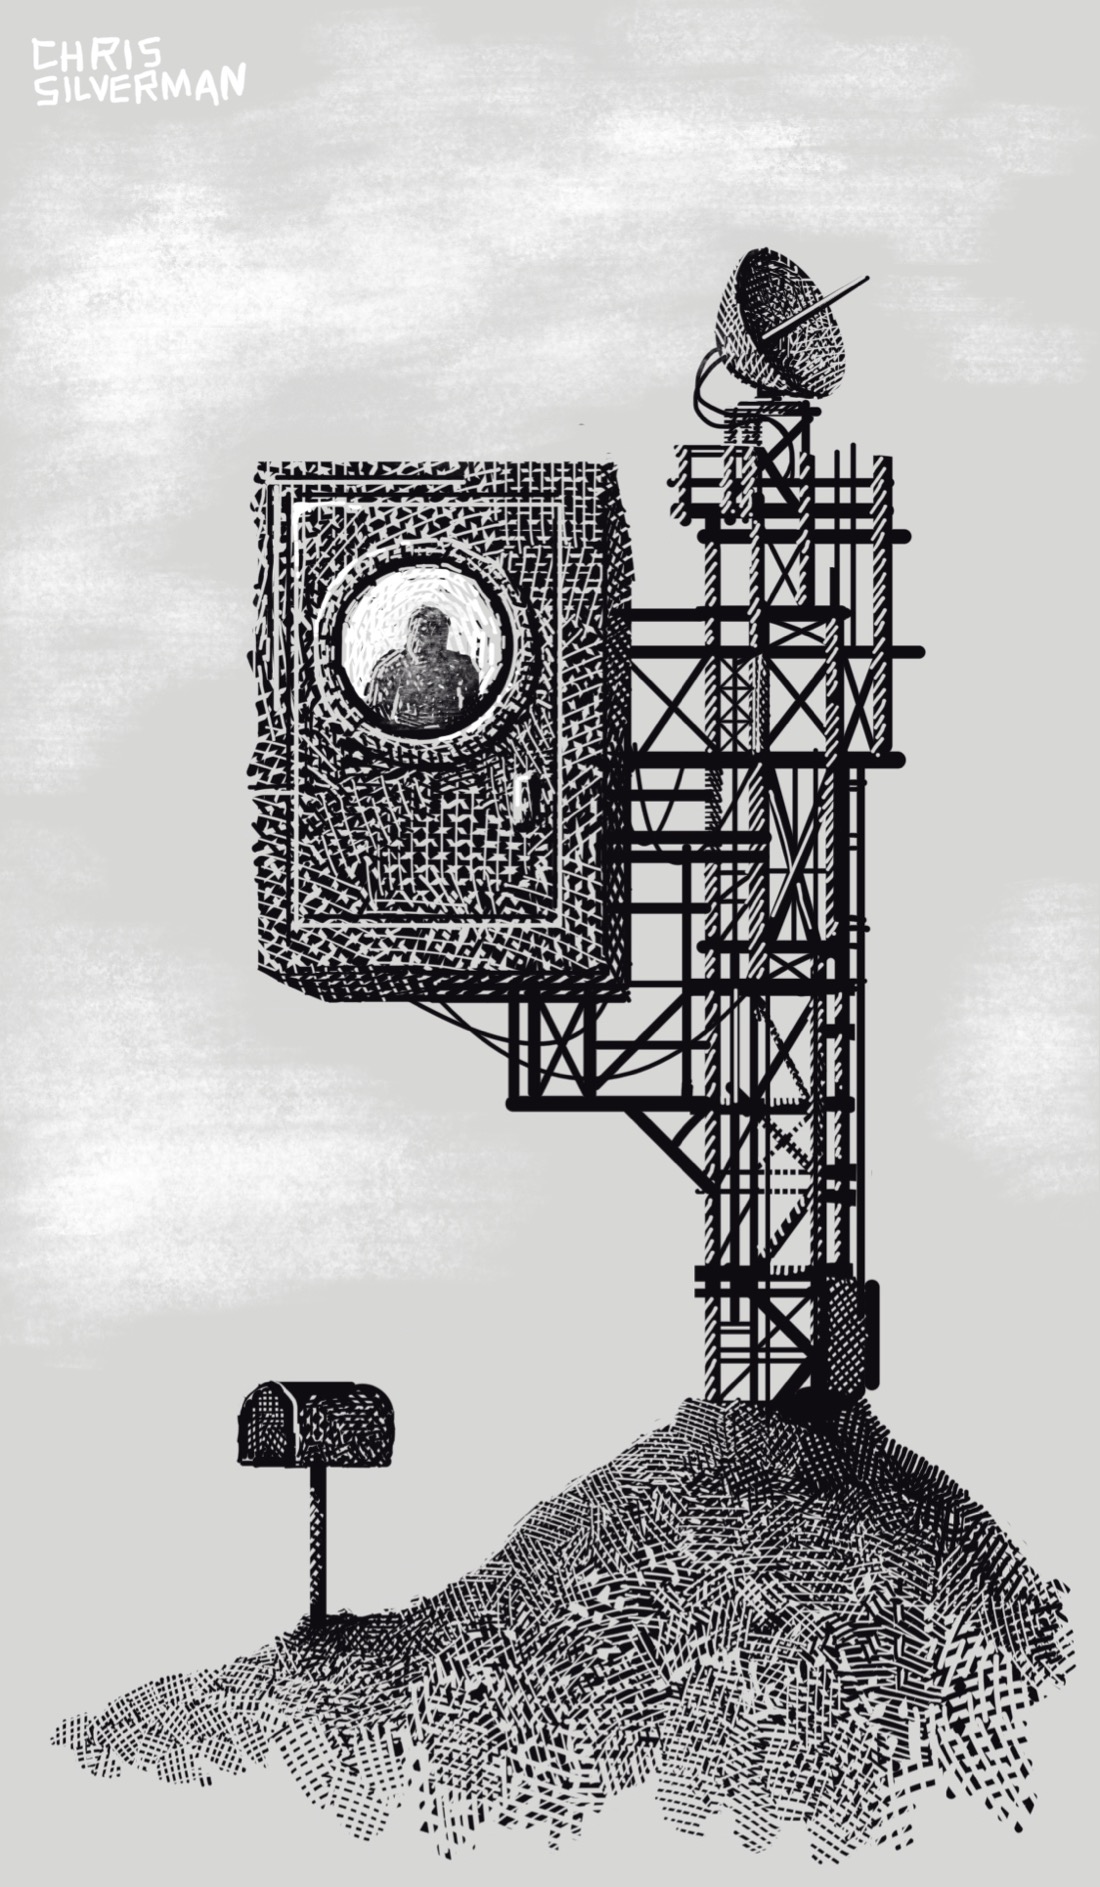 A small hill on which is built a chaotically complex steel tower. It looks like a short radio mast, with many beams and crossbeams. At the top of the tower is a compact dish antenna. Extending off the left side of the tower is a network of horizontal beams that are supporting a small metal chamber with a door and a round portal window, in which is visible a dim figure. The effect is that of someone living in a treehouse made from a safe and an erector set. Below the chamber is a black mailbox. The sky has a few wispy suggestions of clouds. The drawing is black linework on a light gray background, with white used for the clouds and a few highlights.